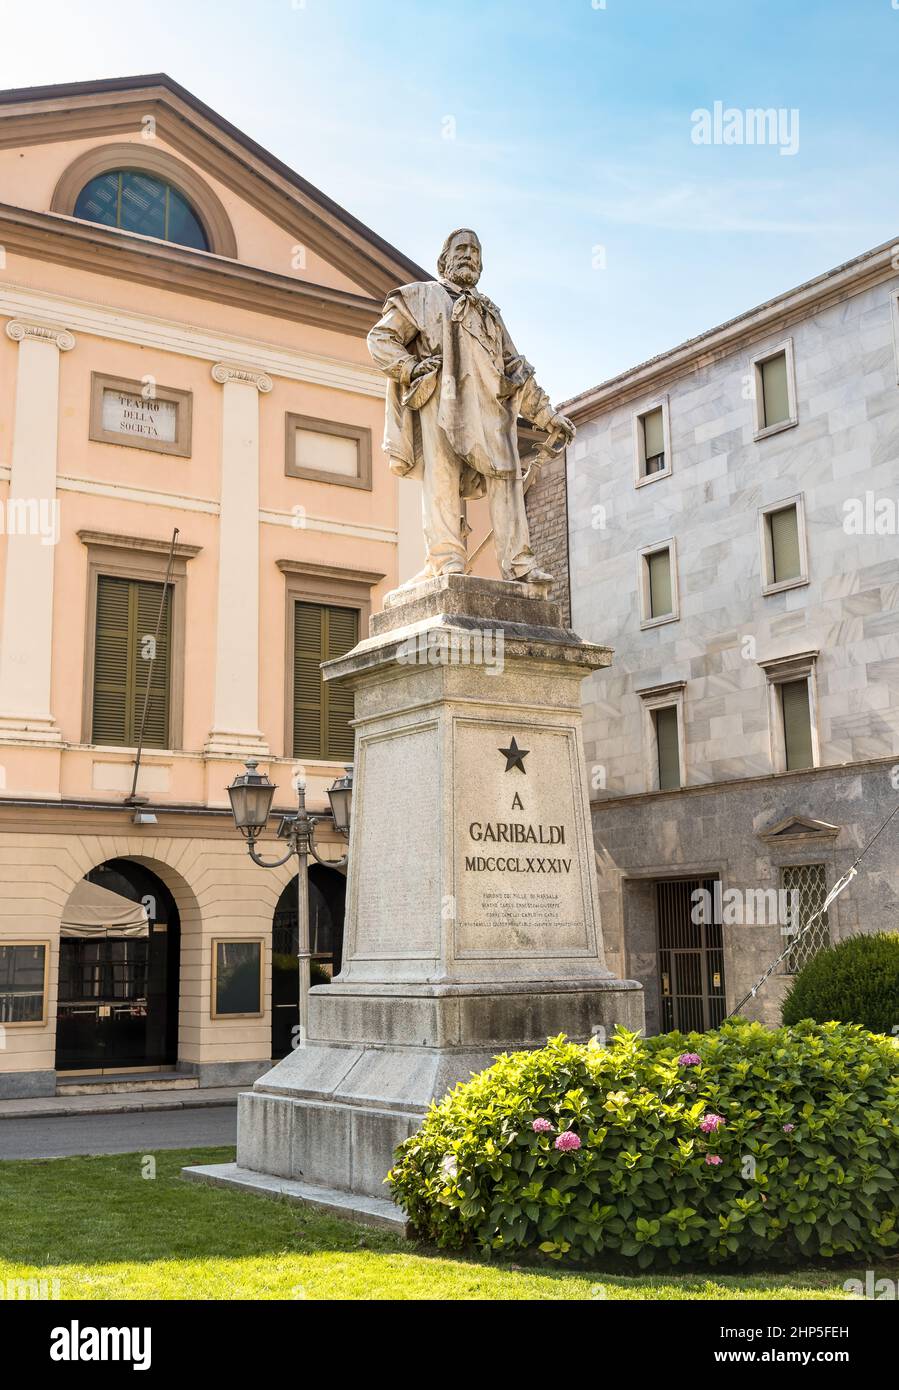 Lecco, Lombardy, Italy - July 28, 2015: Monument to Giuseppe Garibaldi in front of the Theater of society in Lecco city. Stock Photo